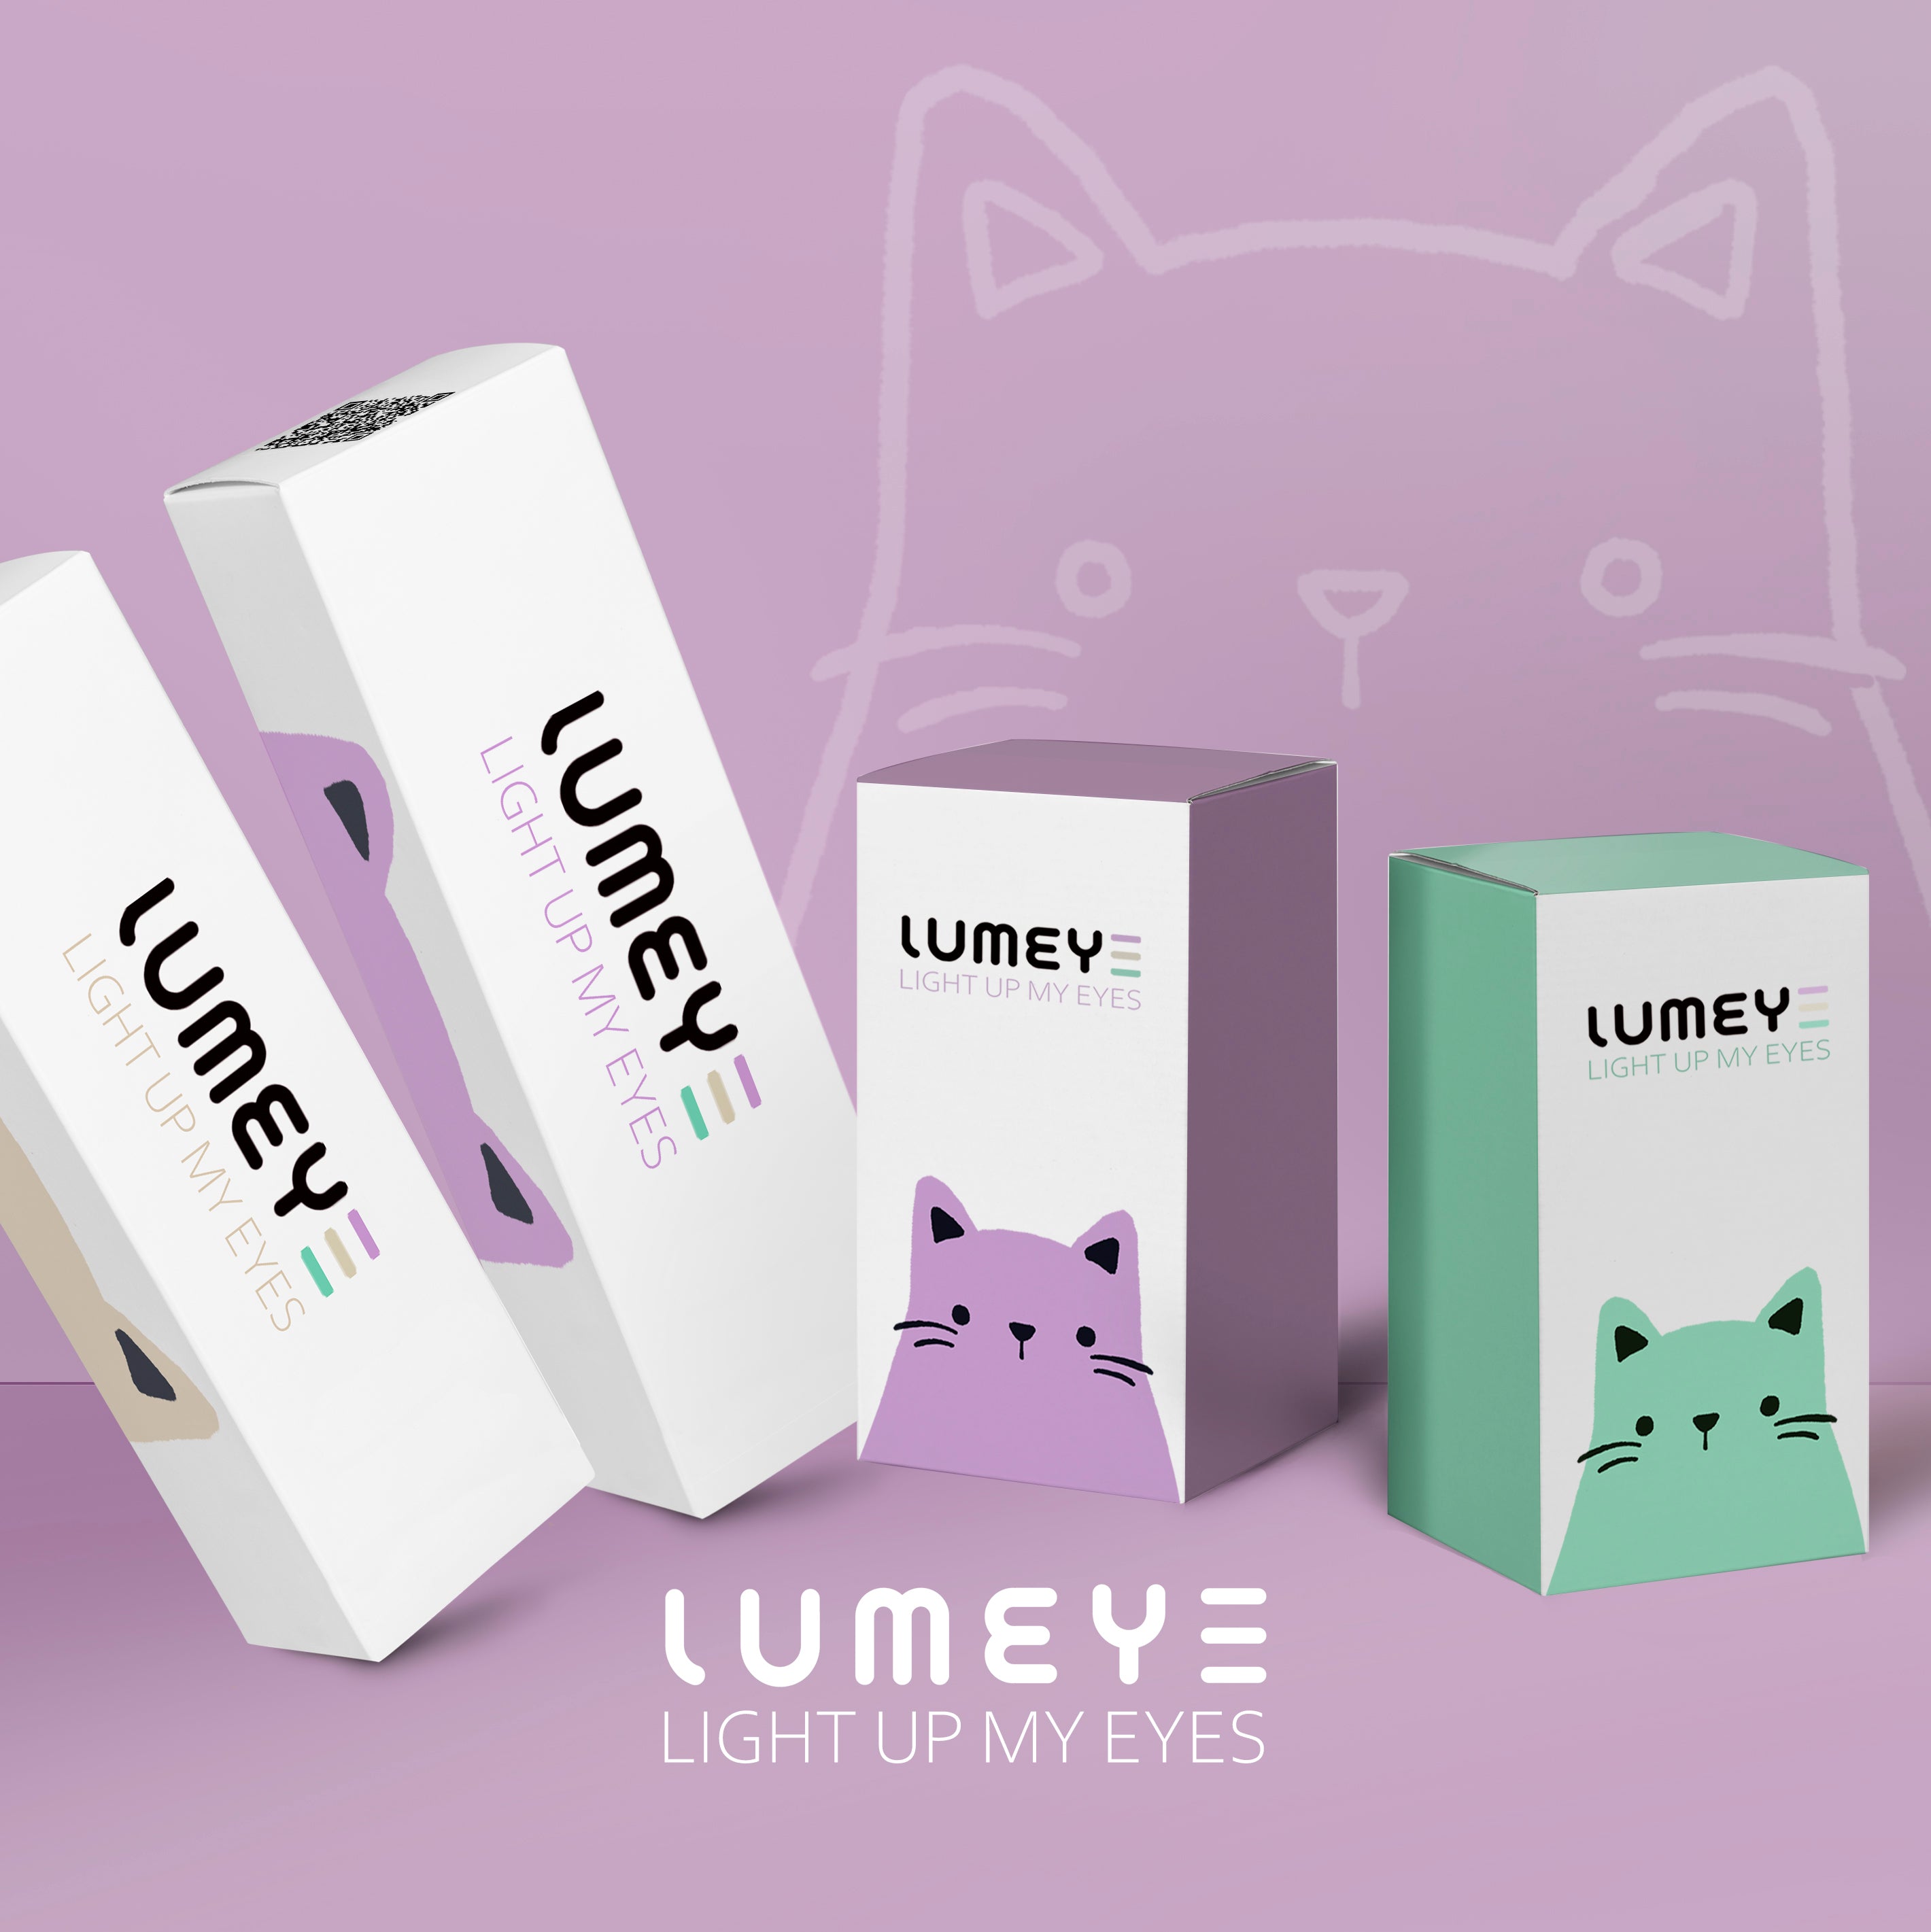 Best COLORED CONTACTS - LUMEYE Pure Green Colored Contact Lenses - LUMEYE